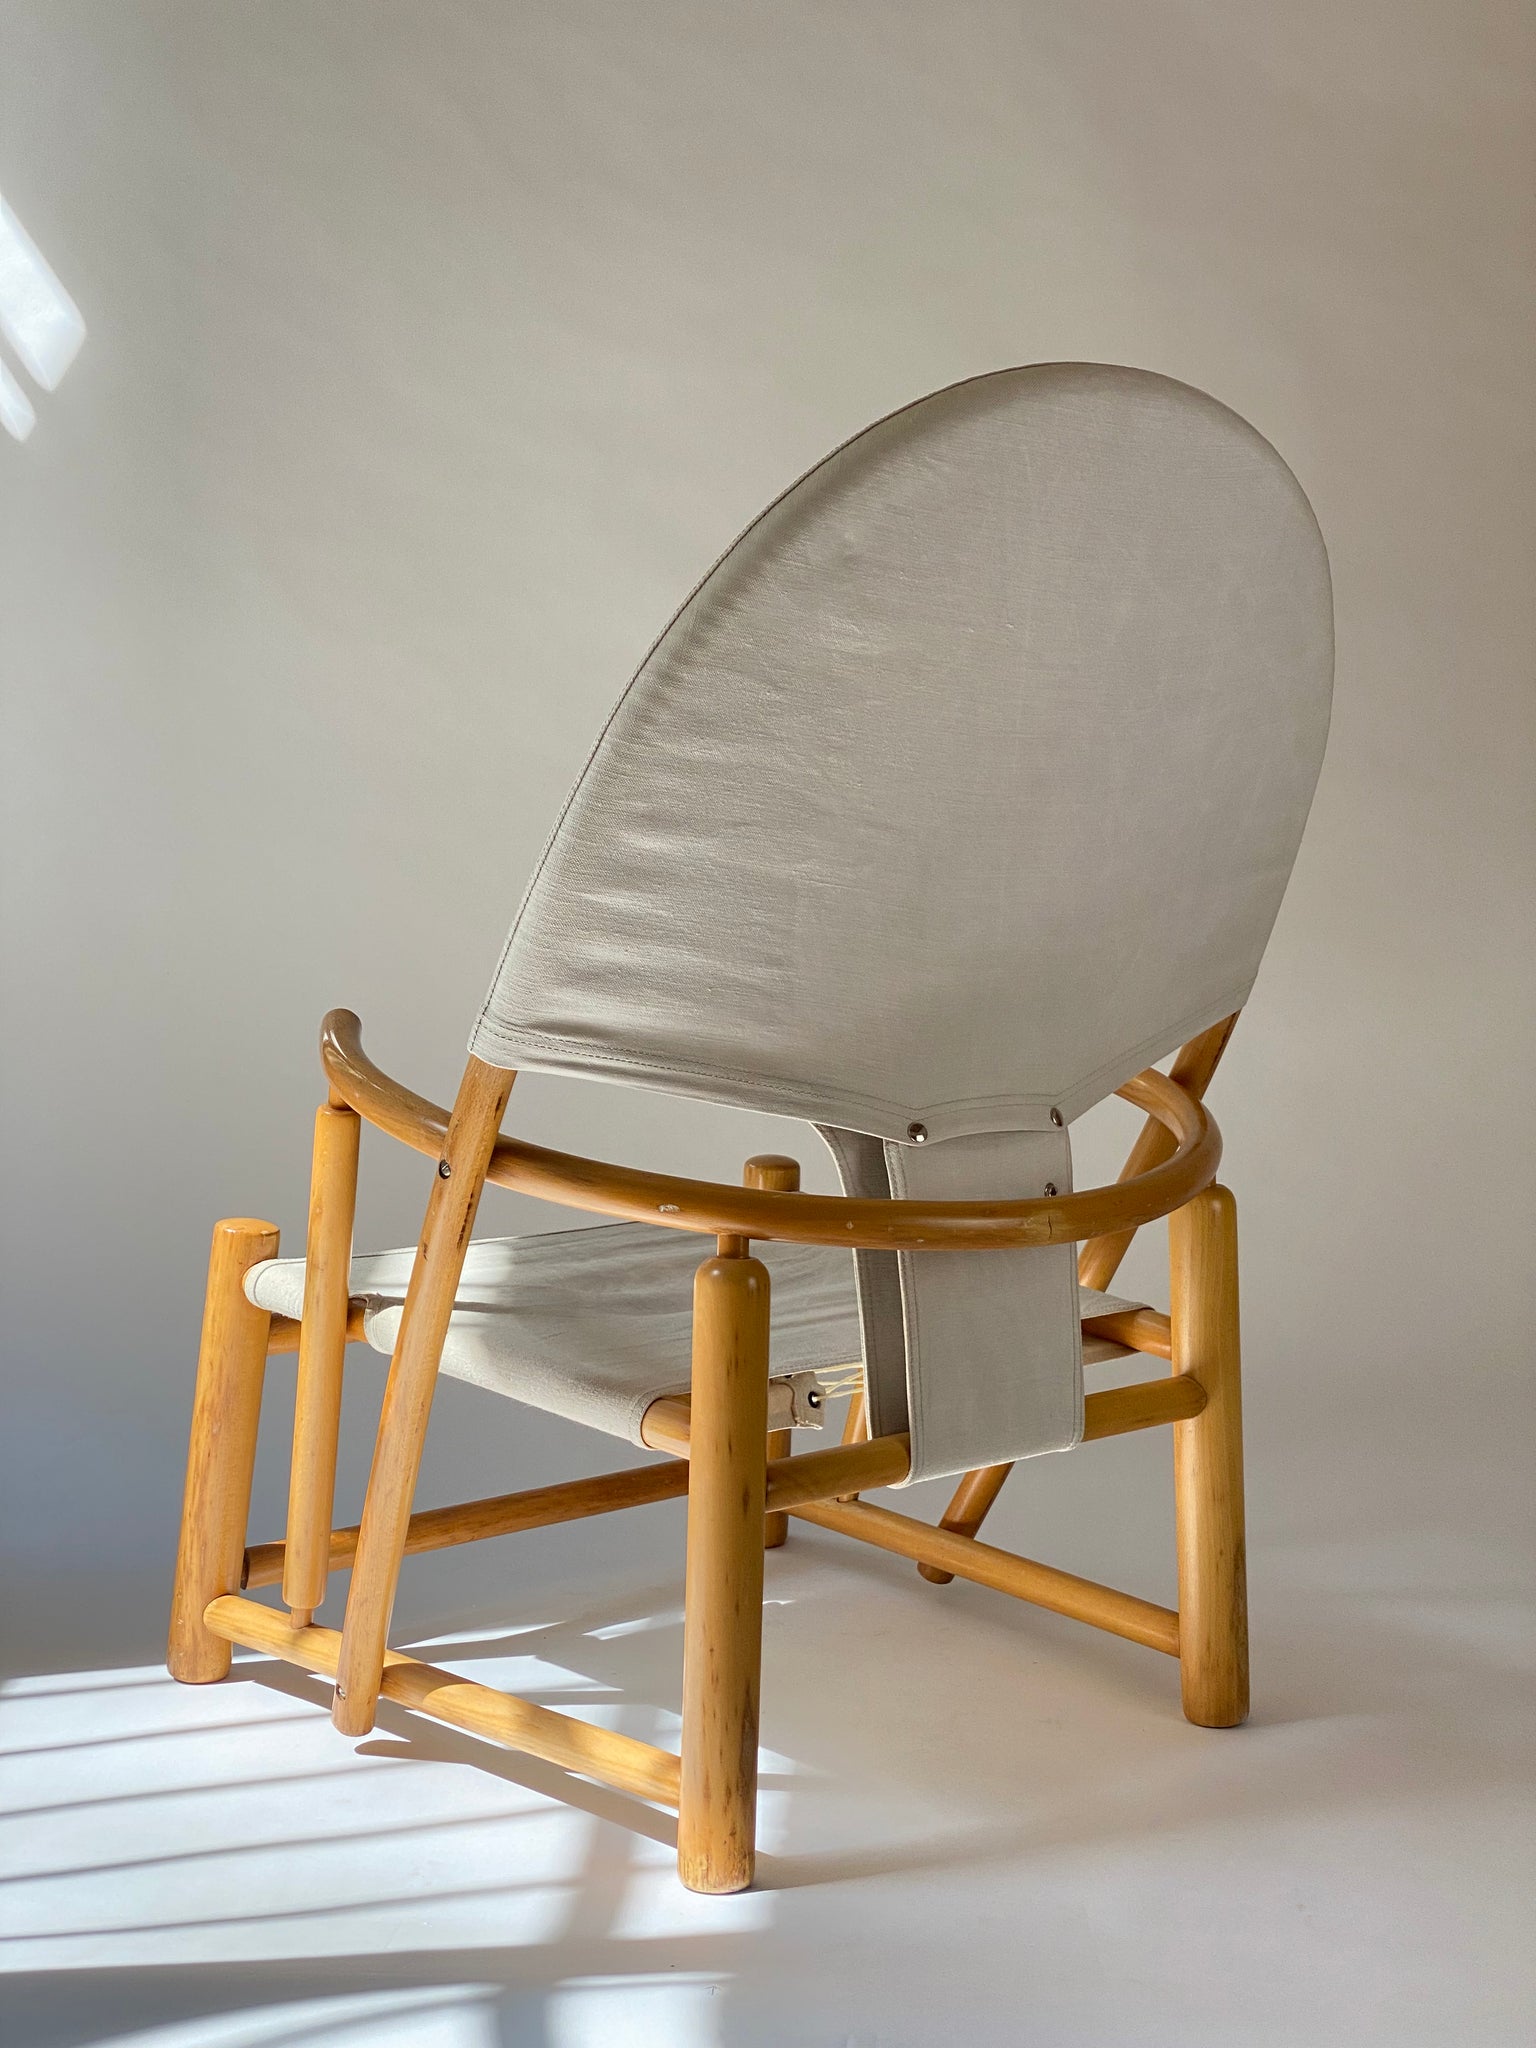 G23 Hoop Lounge Chair by Piero Palange & Werther Toffoloni for Germa, 1970s